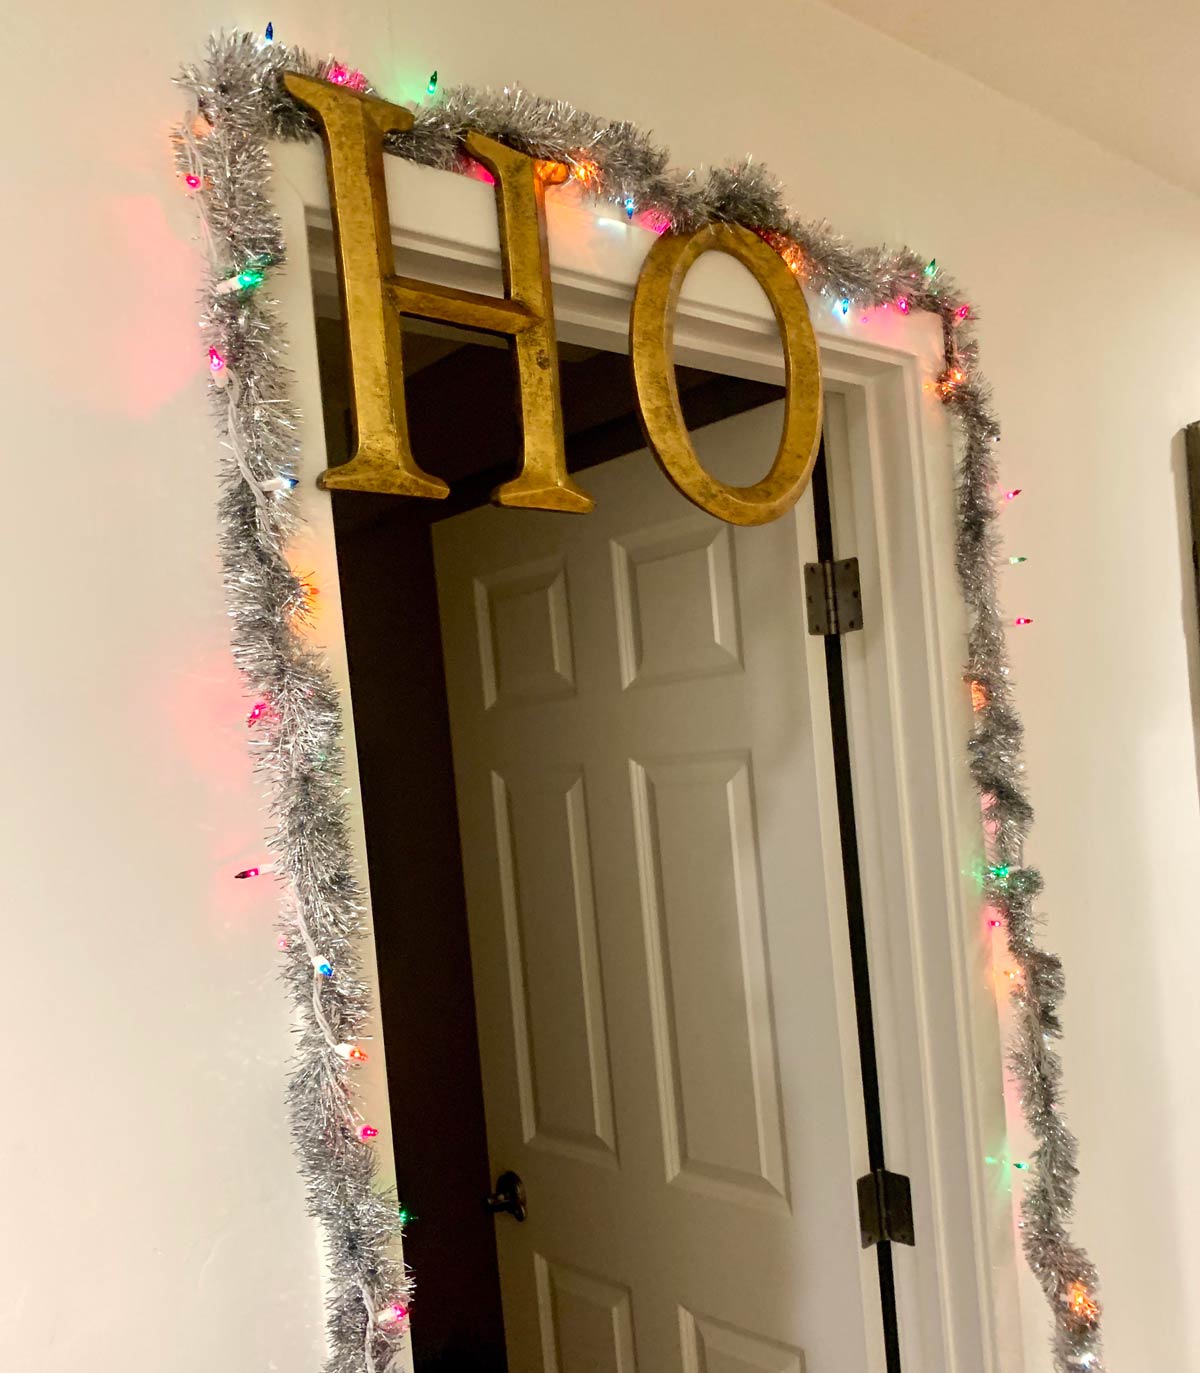 Decided to decorate my sister’s room before she comes home for the holidays. I hope she likes it!